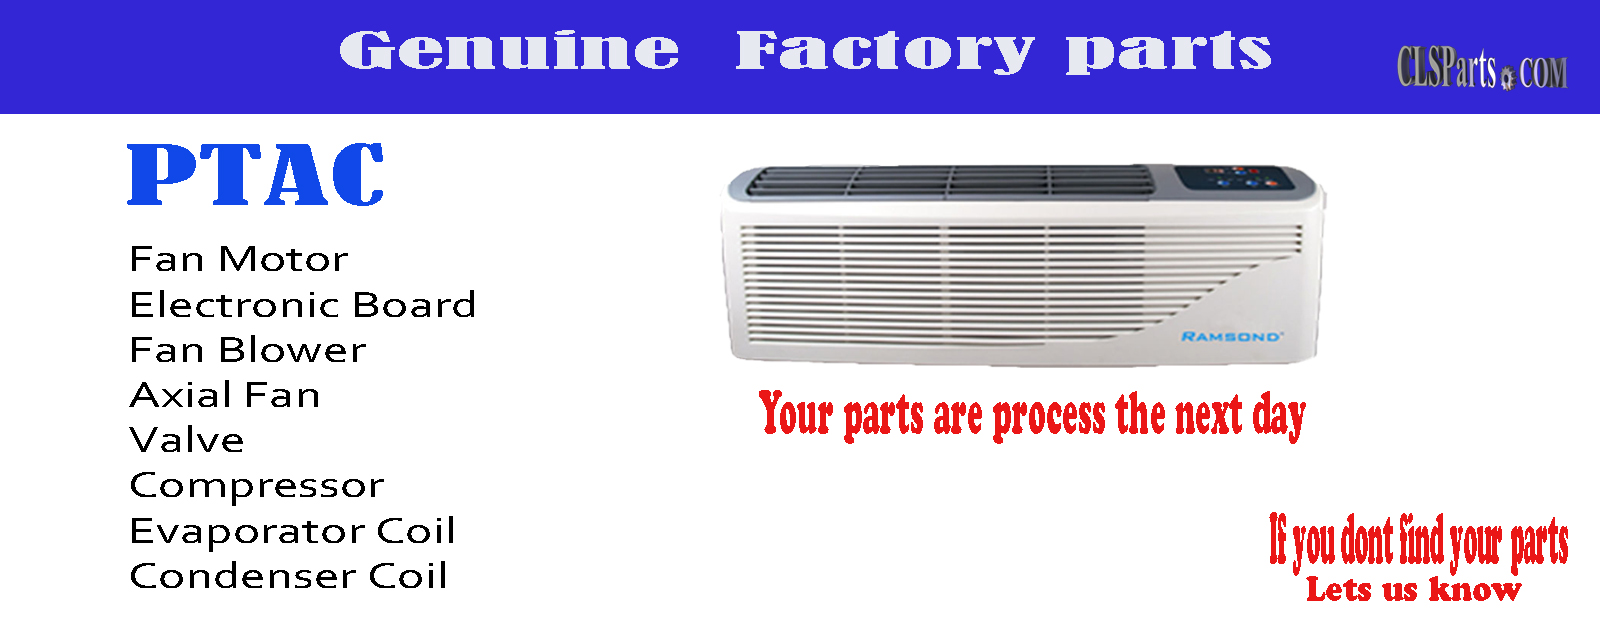 ac-parts-main-page-ptac.jpg